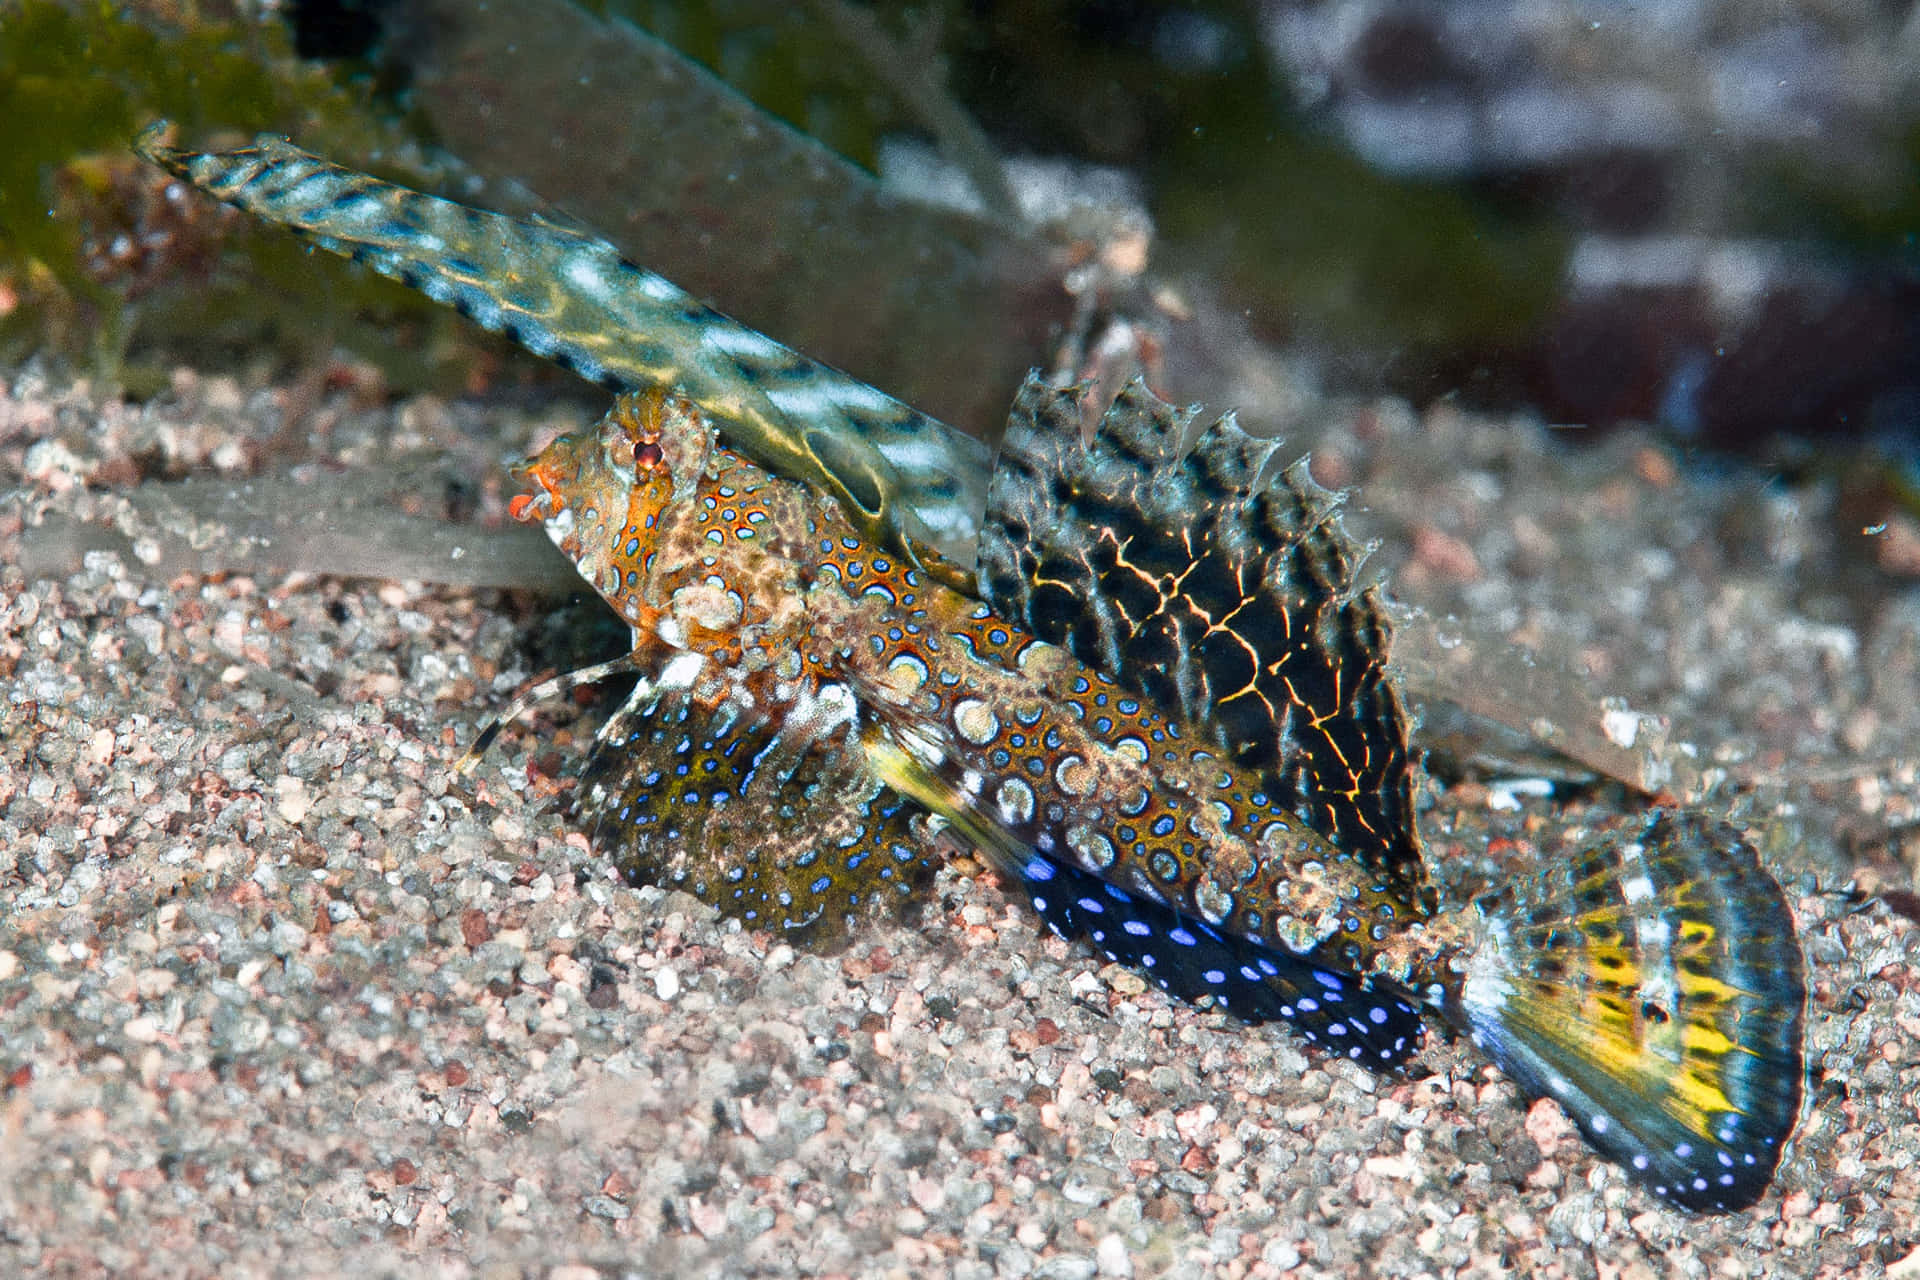 Colorful Dragonet Fish On Seabed.jpg Wallpaper